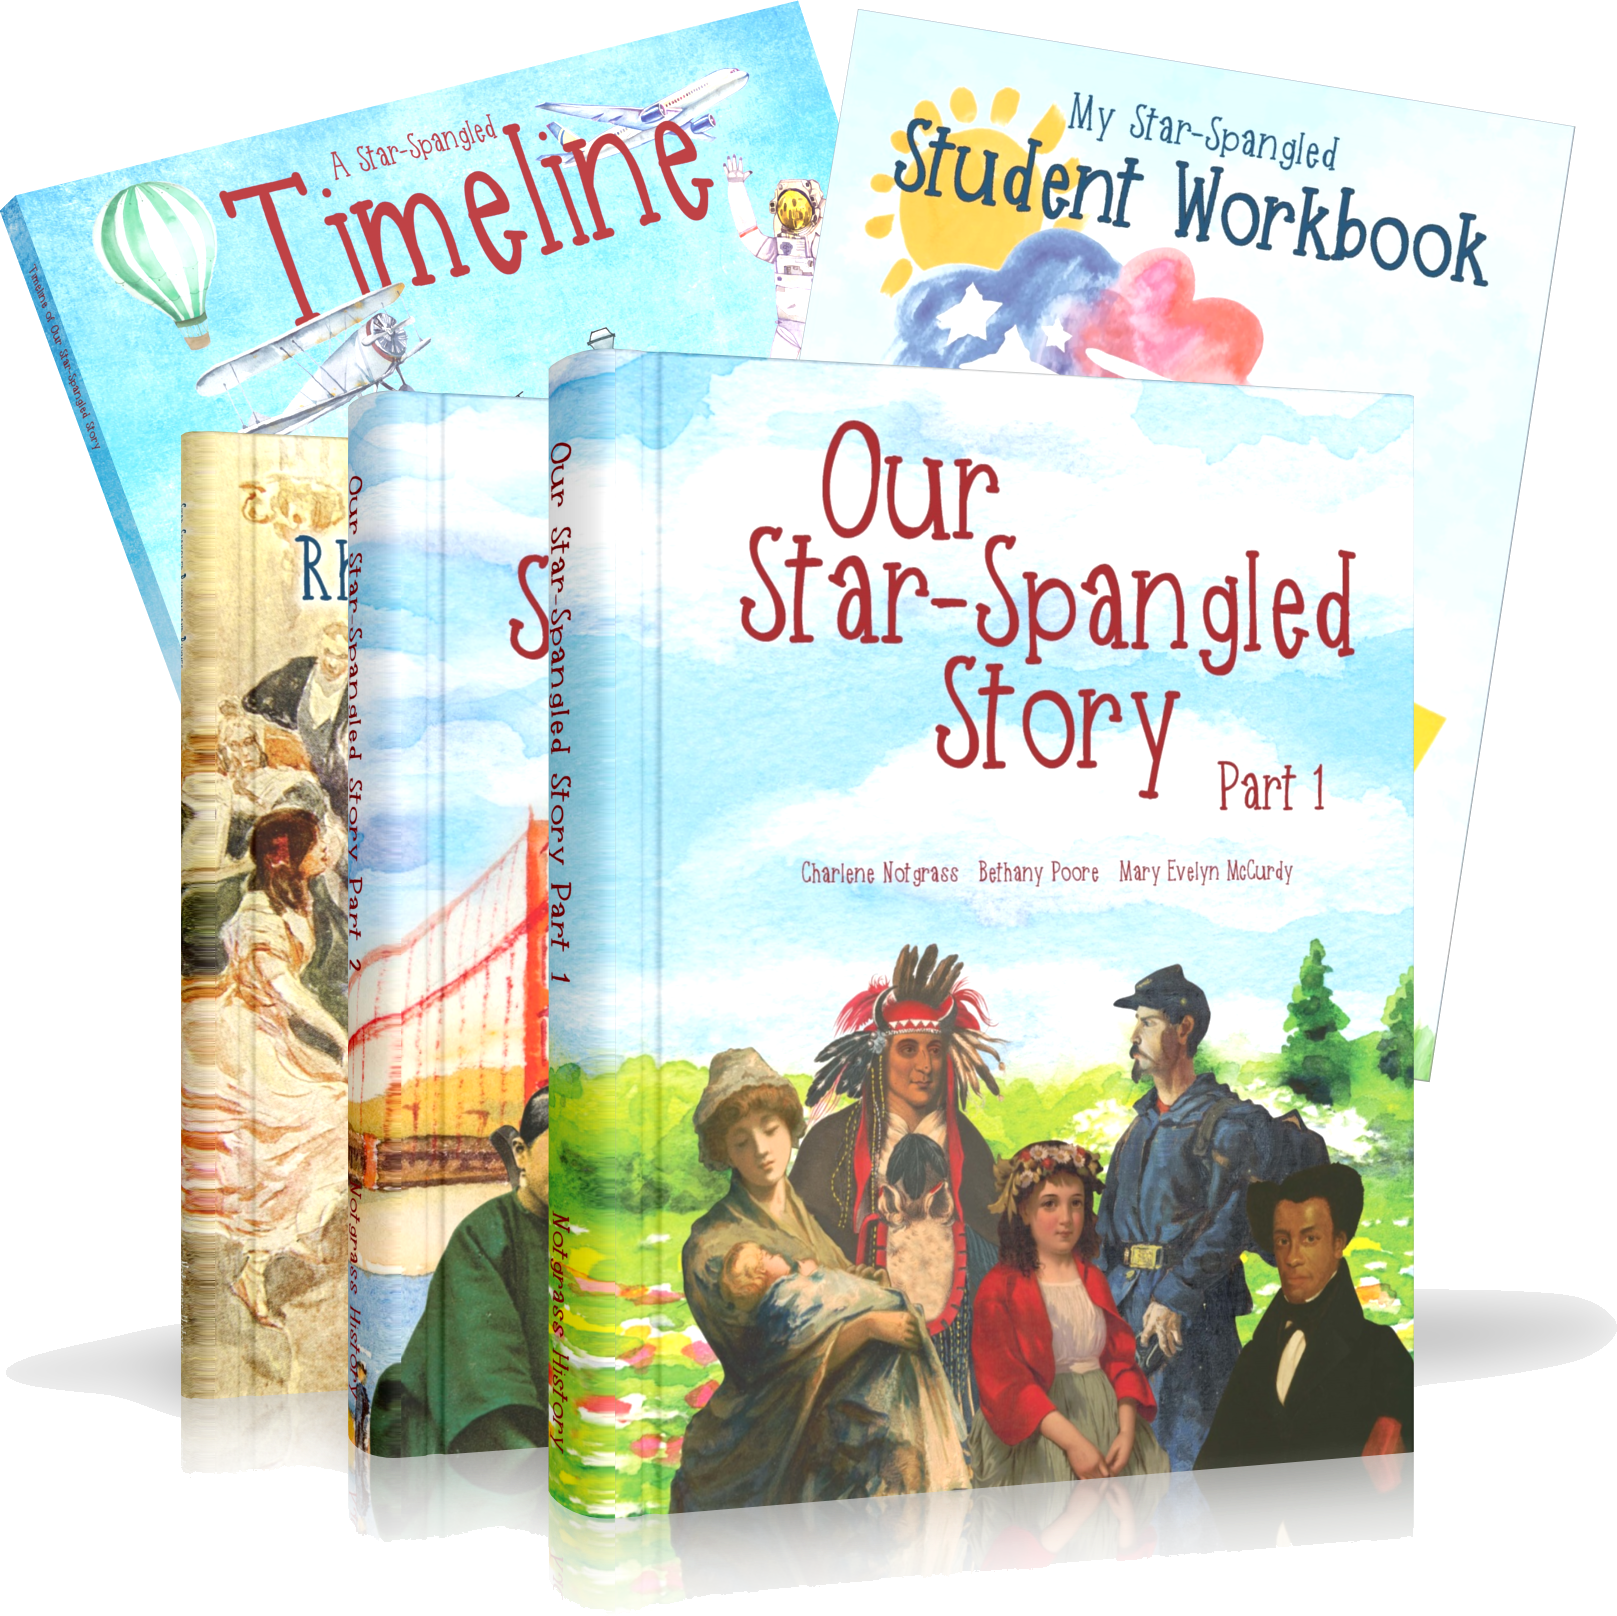 Our Star-Spangled Story Curriculum Package